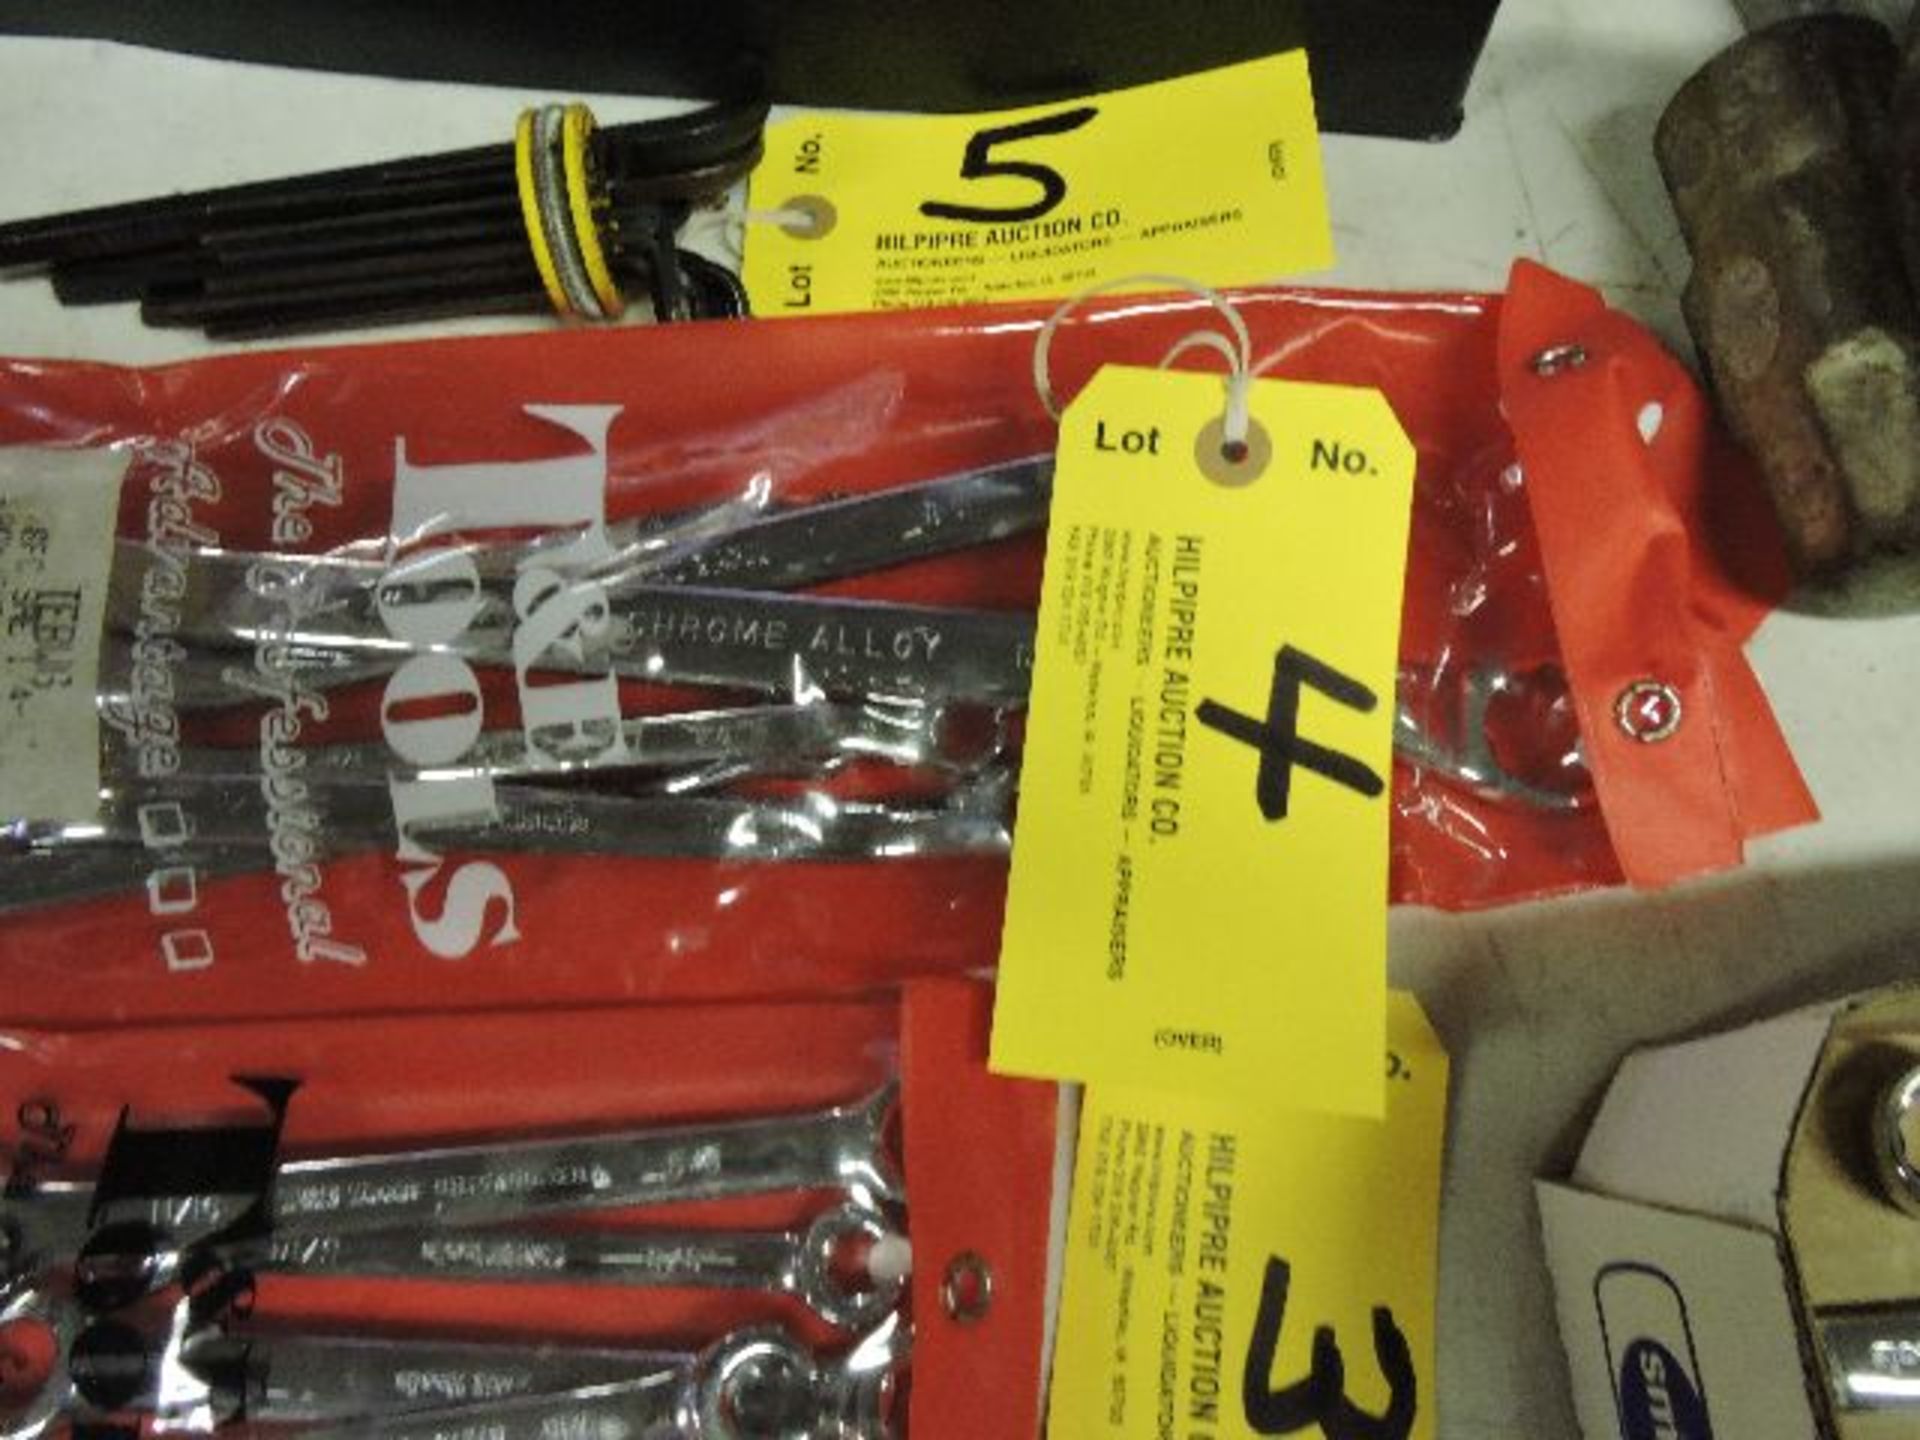 T. E. box end wrenches.